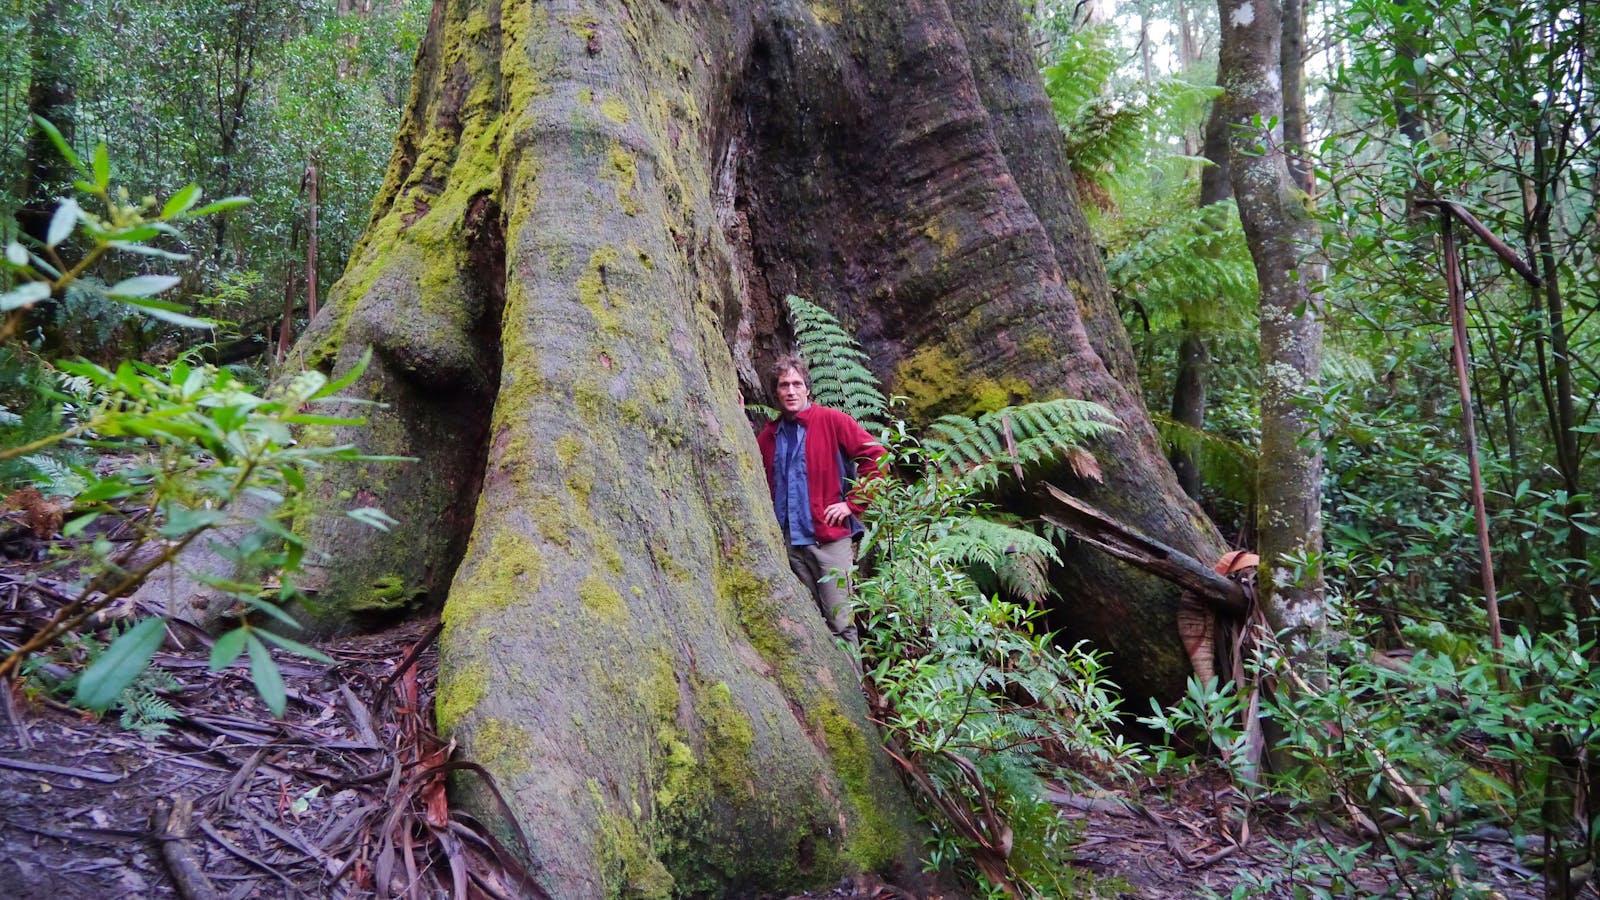 A tree hunter stands at the base of a massive forest tree